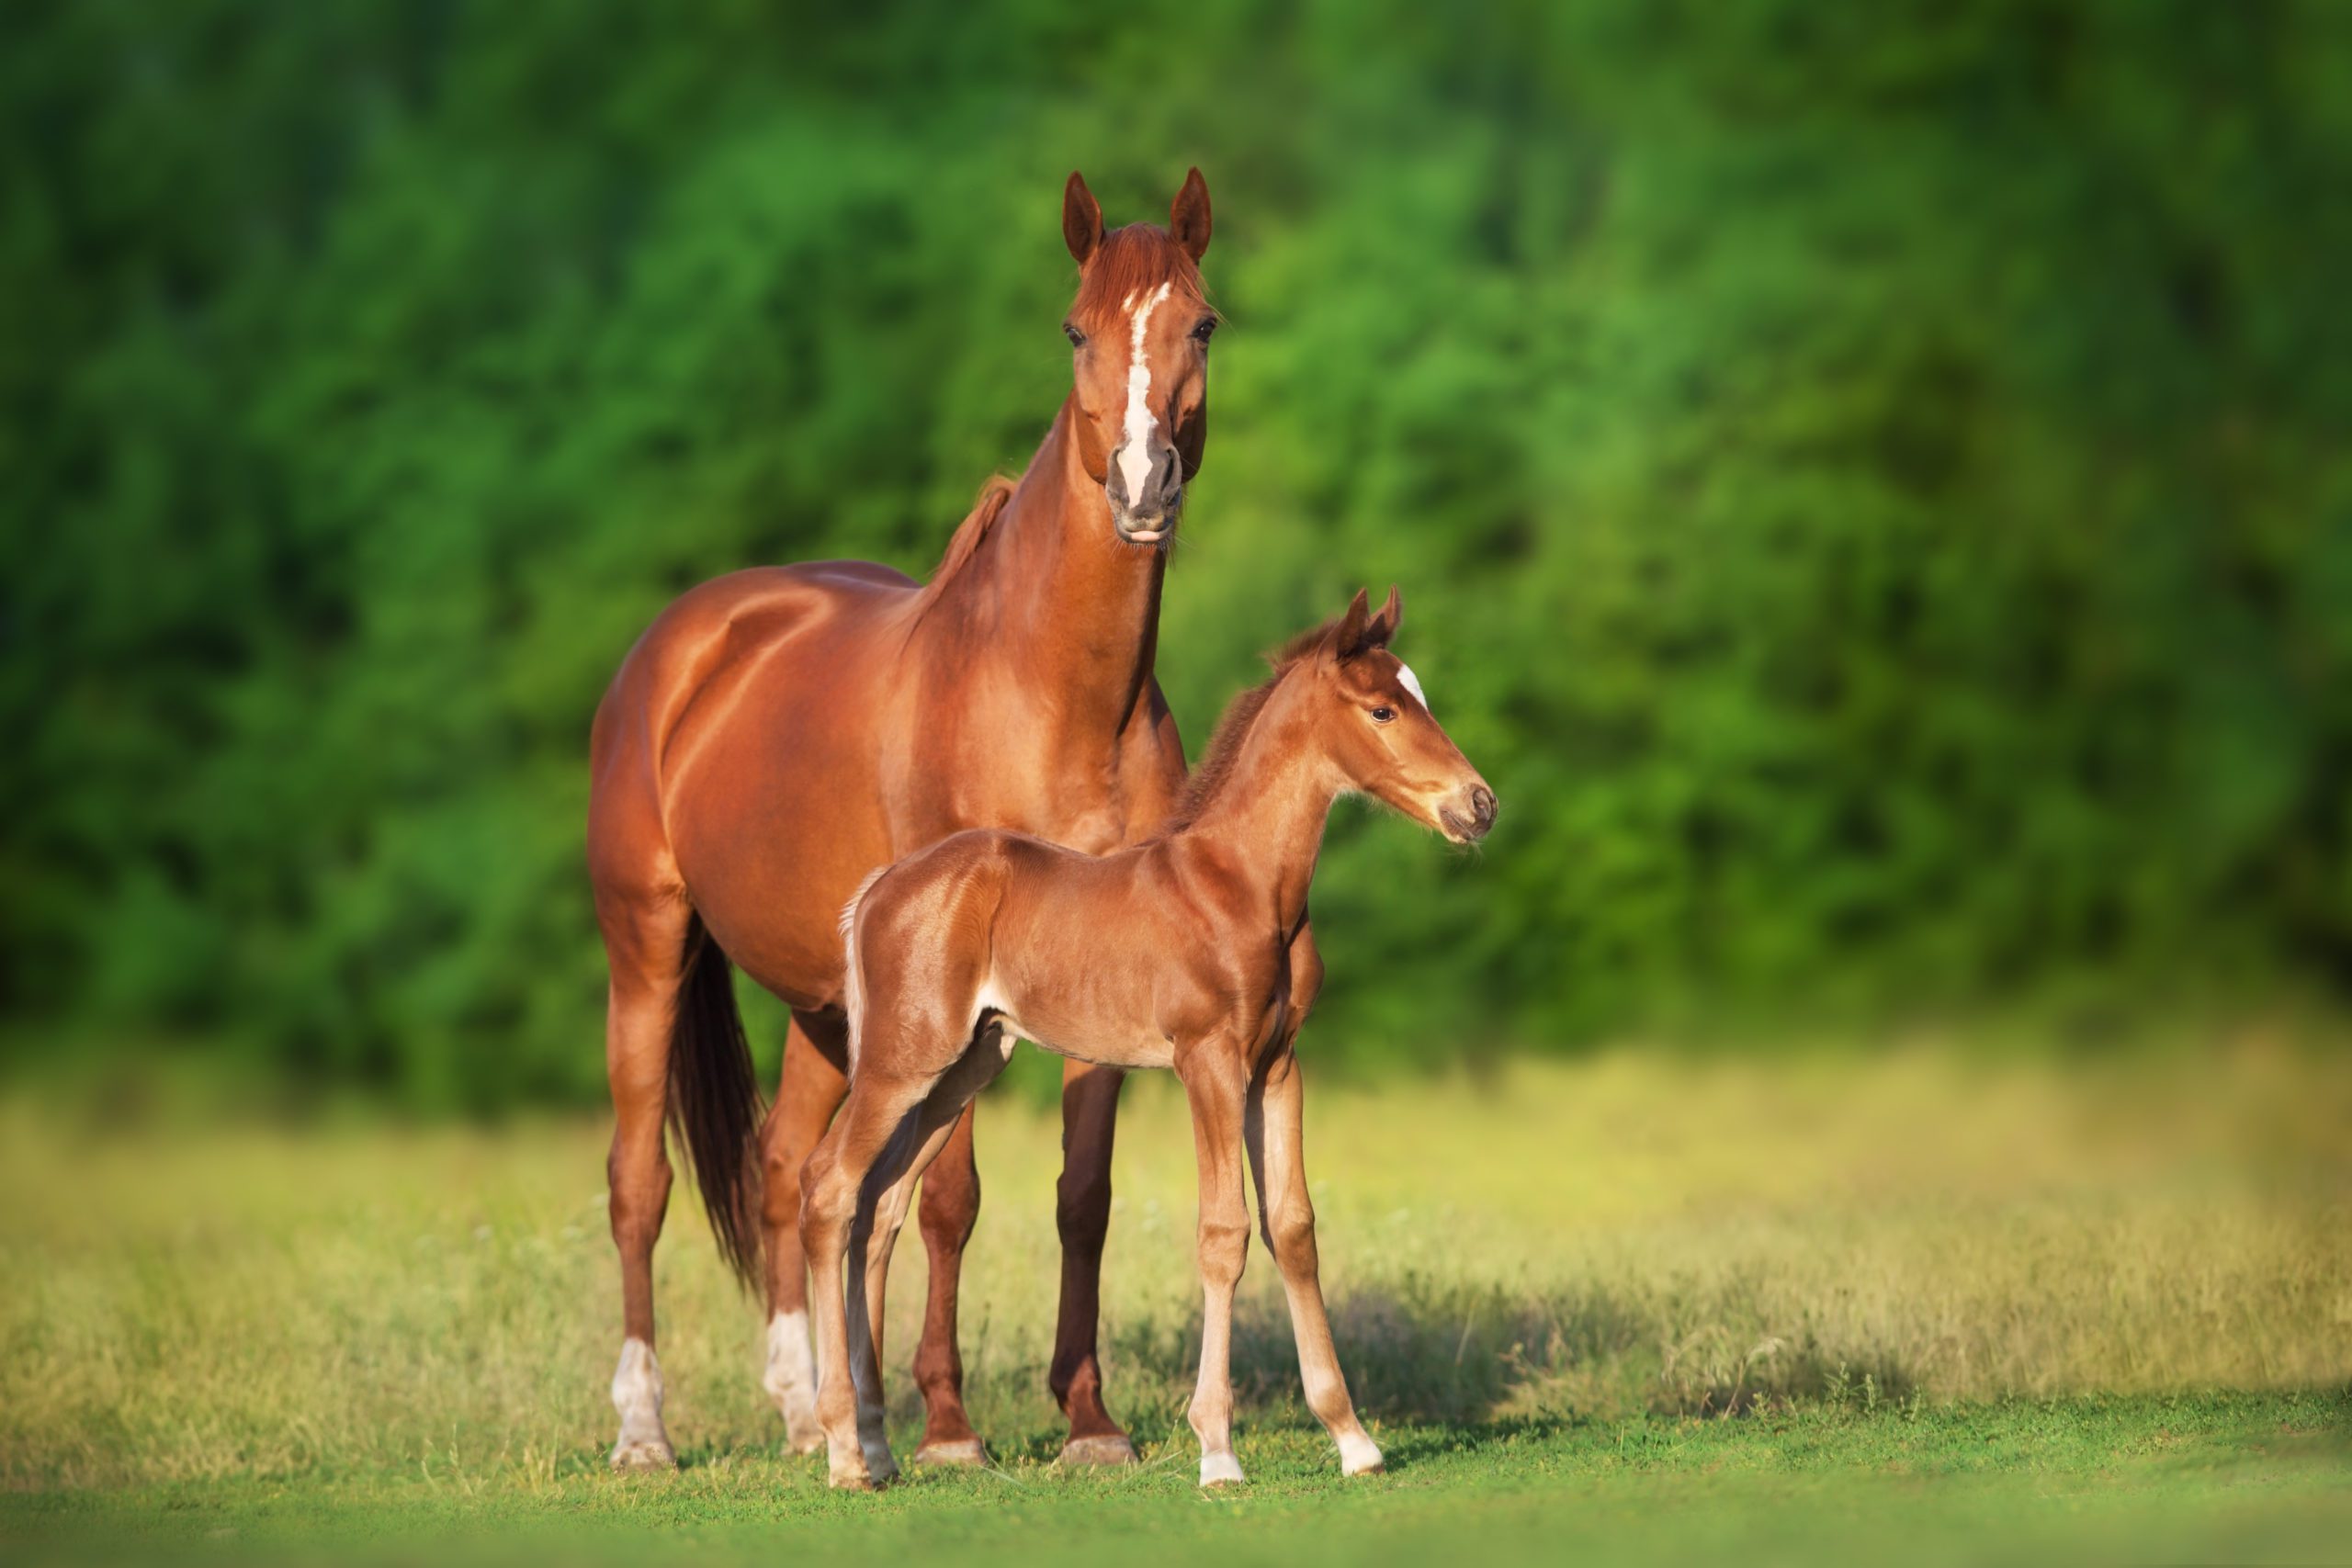 A mare and foal standing in a field